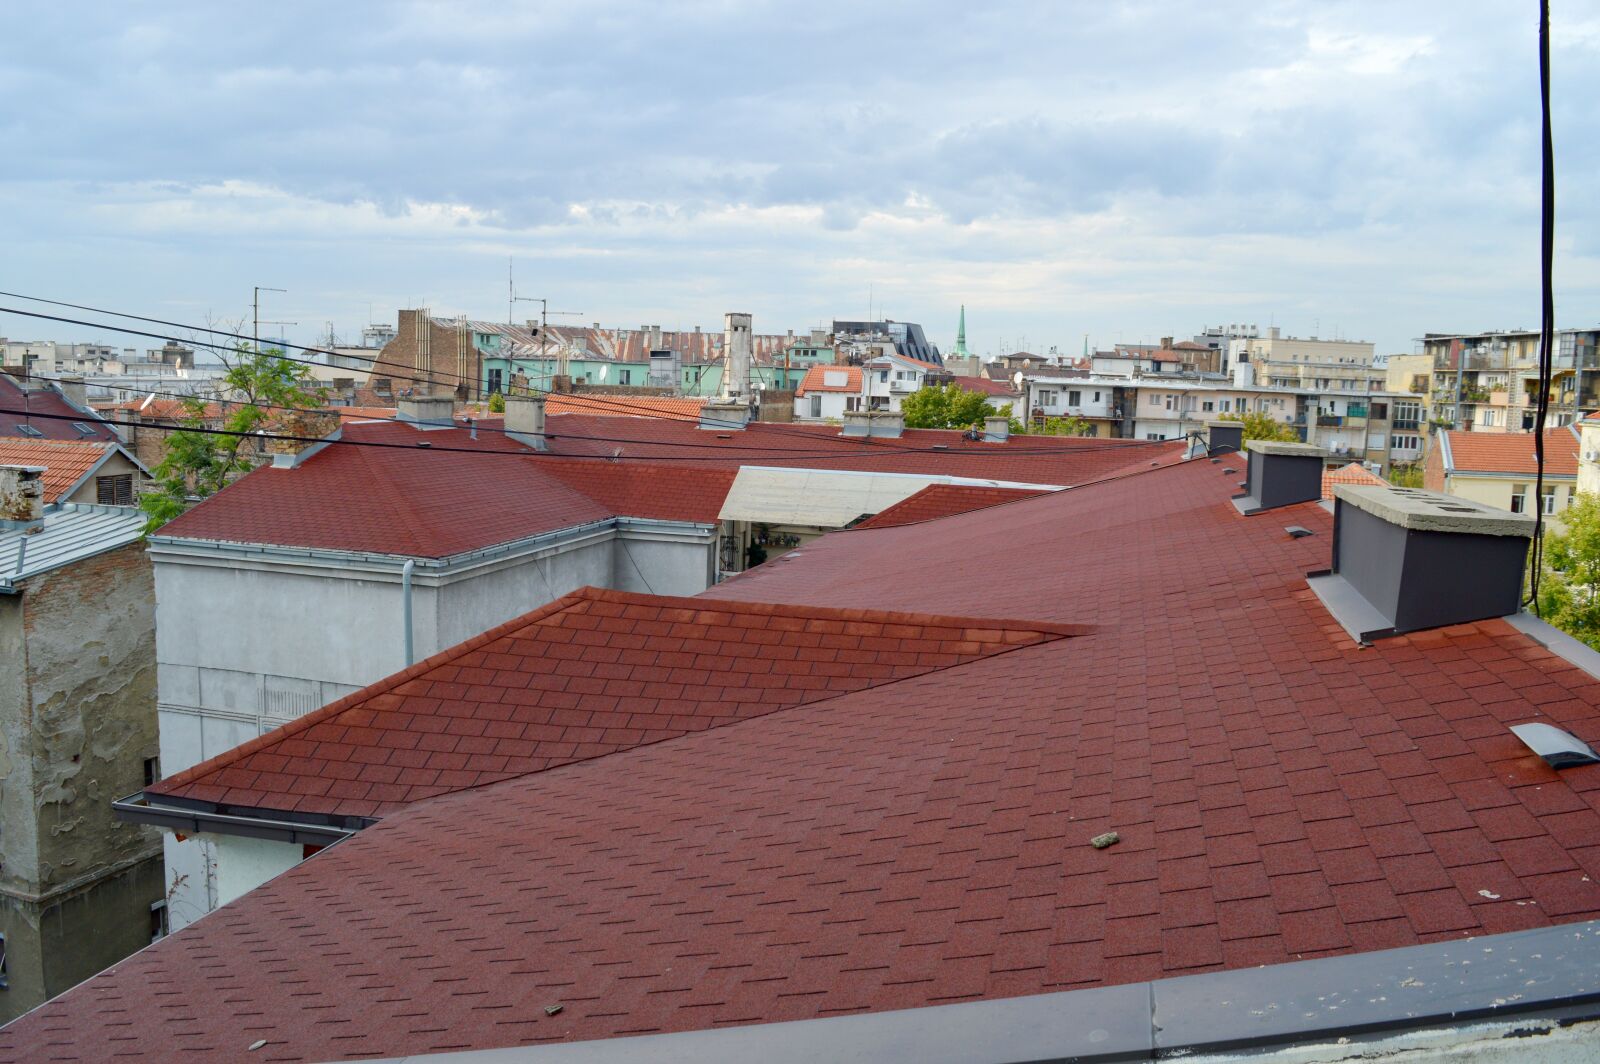 Nikon D3200 sample photo. City, roofs, architecture photography